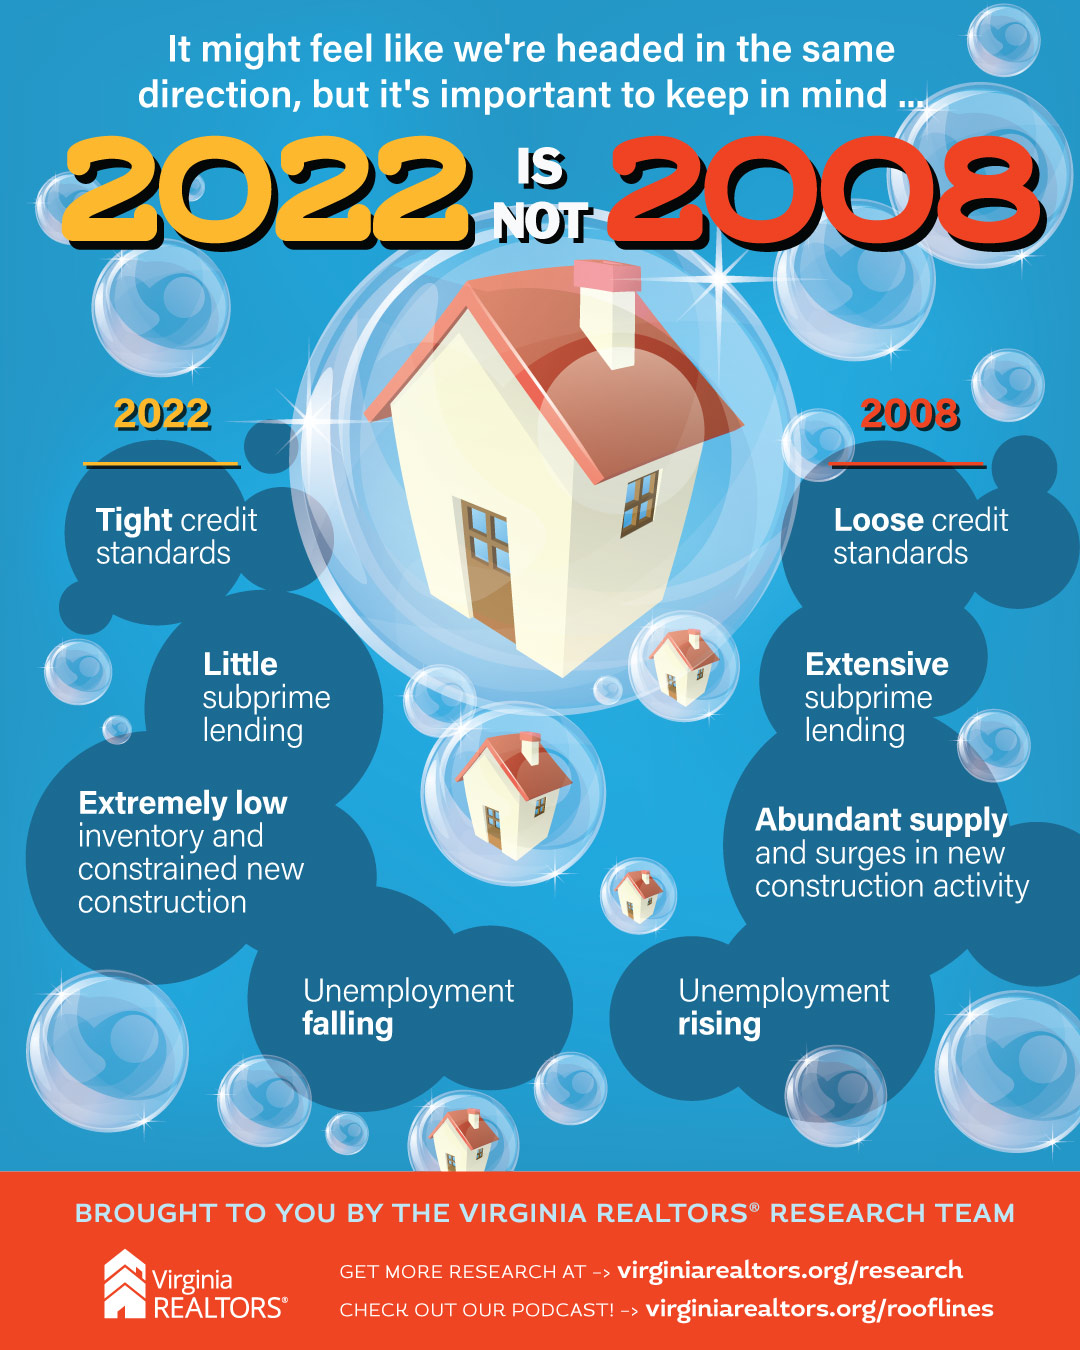 2022 is not 2008 infographic